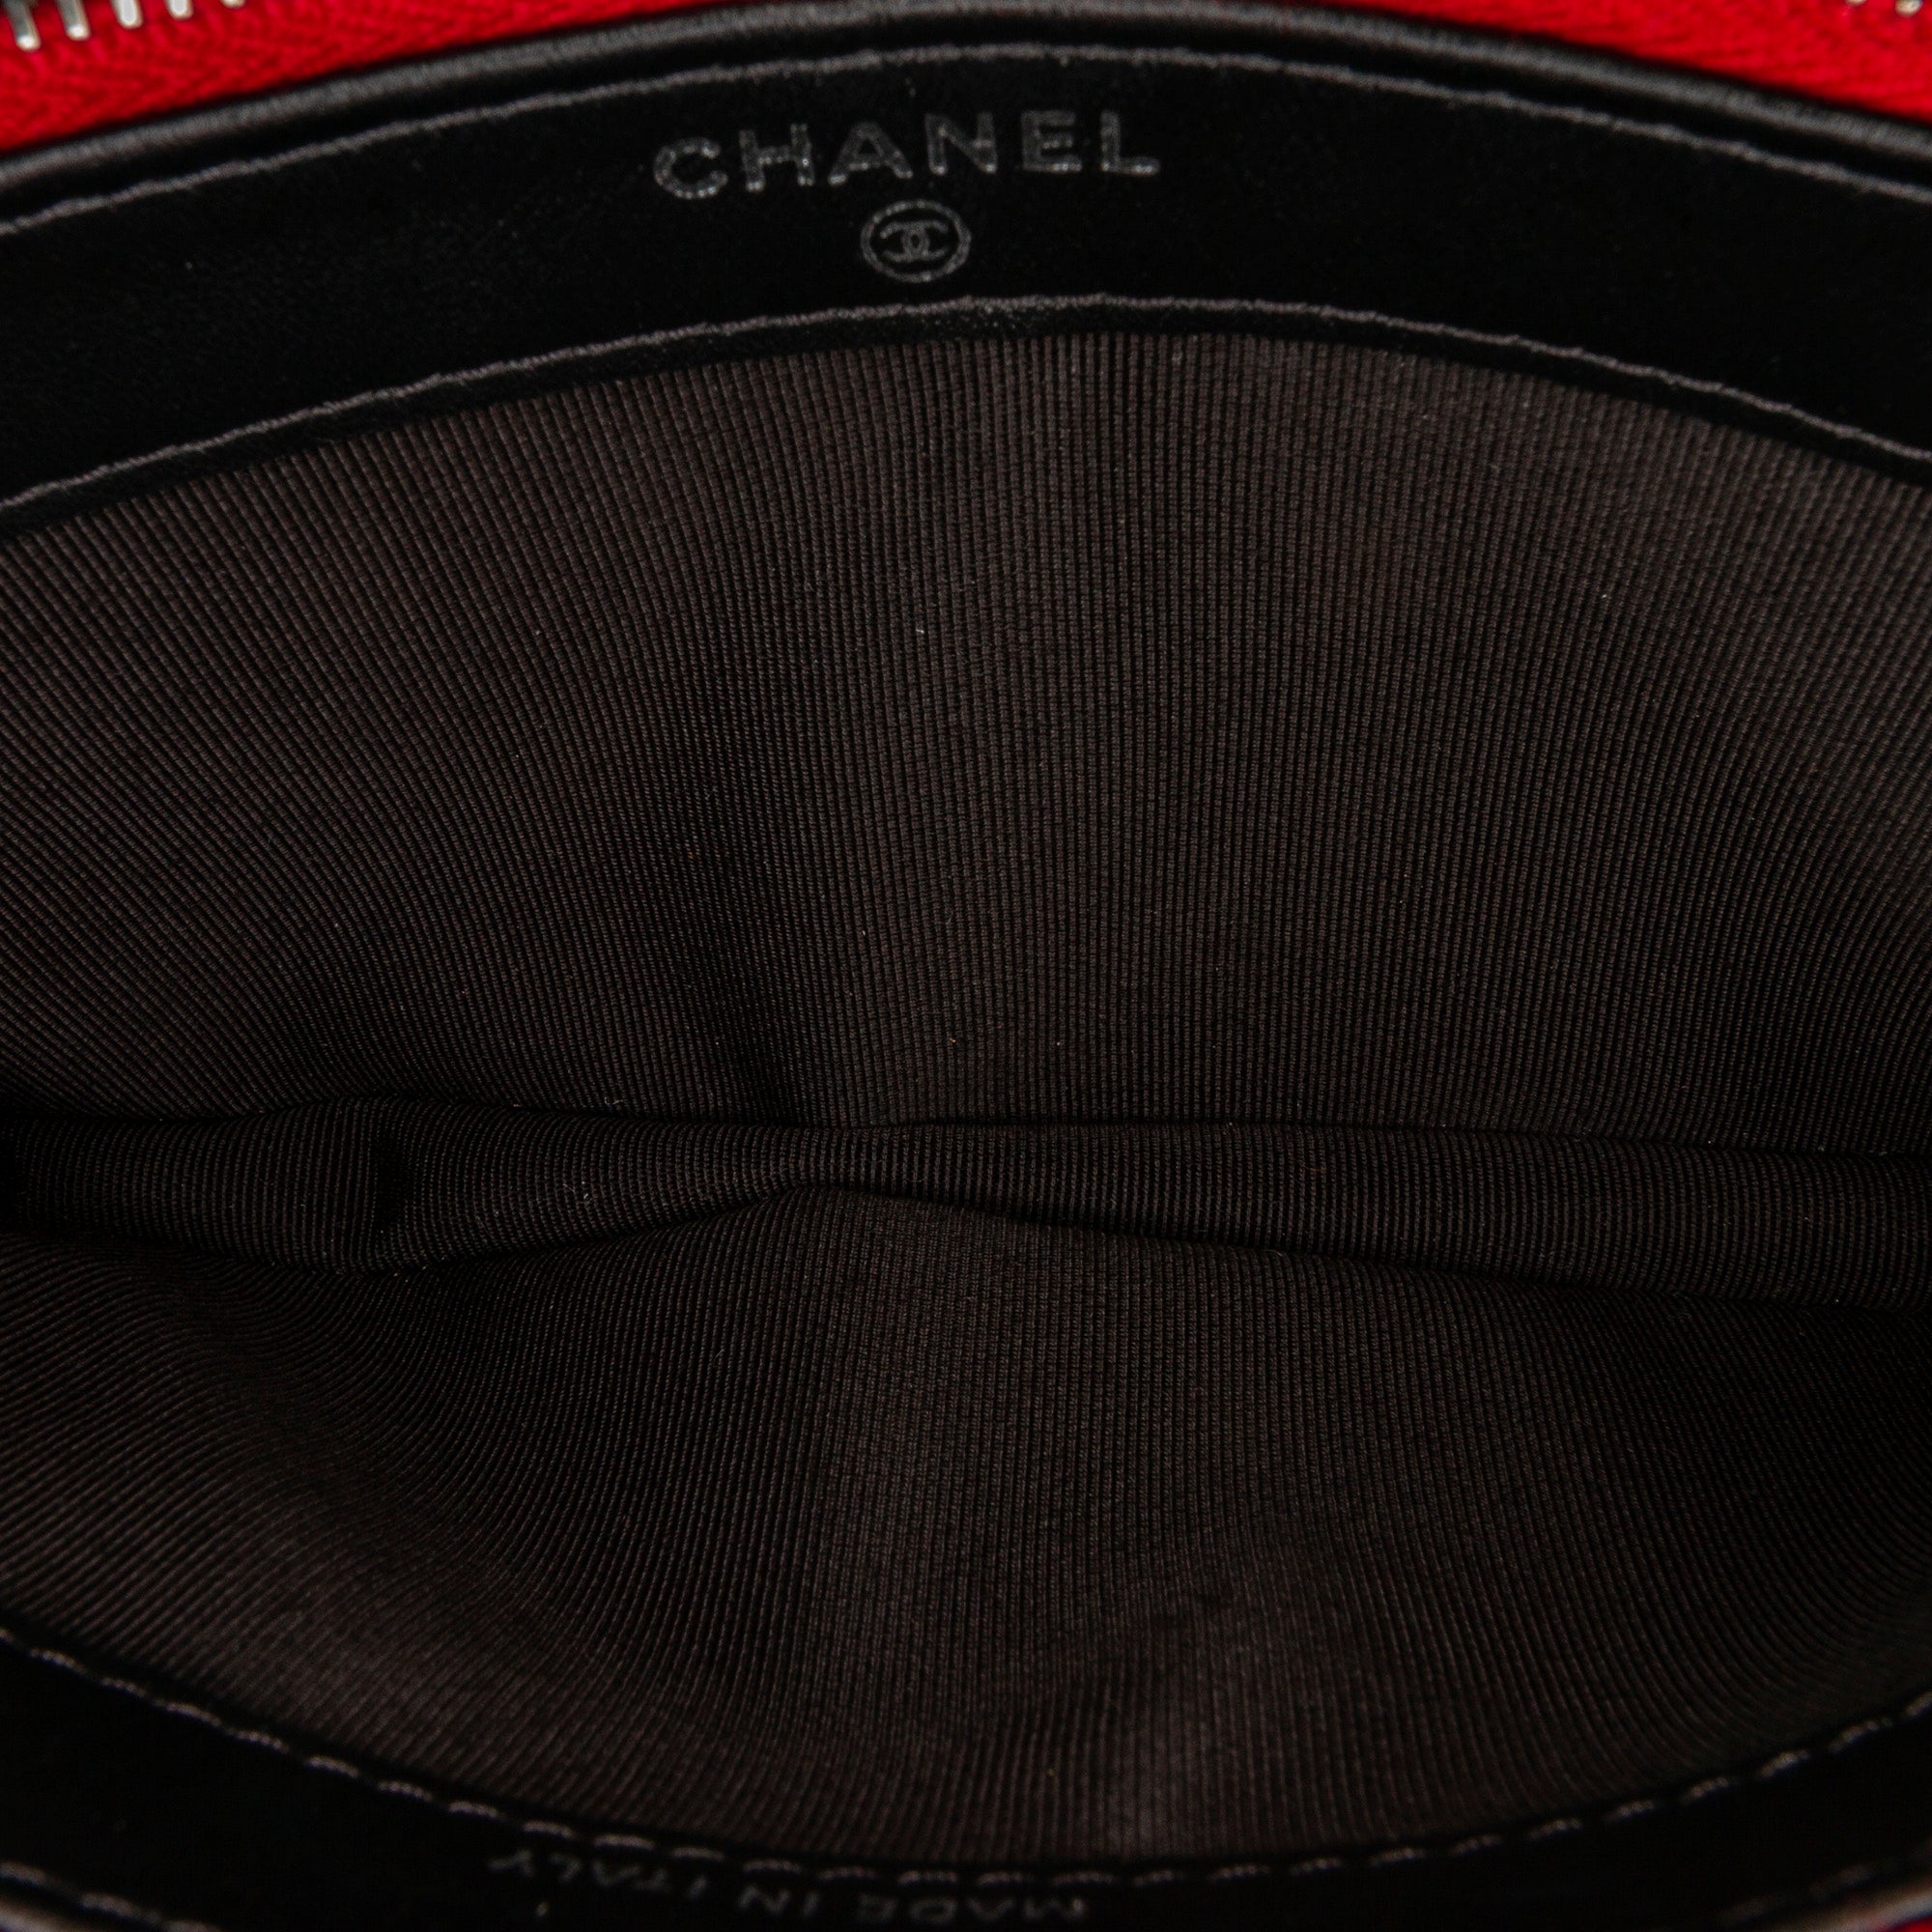 Red Chanel CC Double Zip Wallet on Chain Crossbody Bag